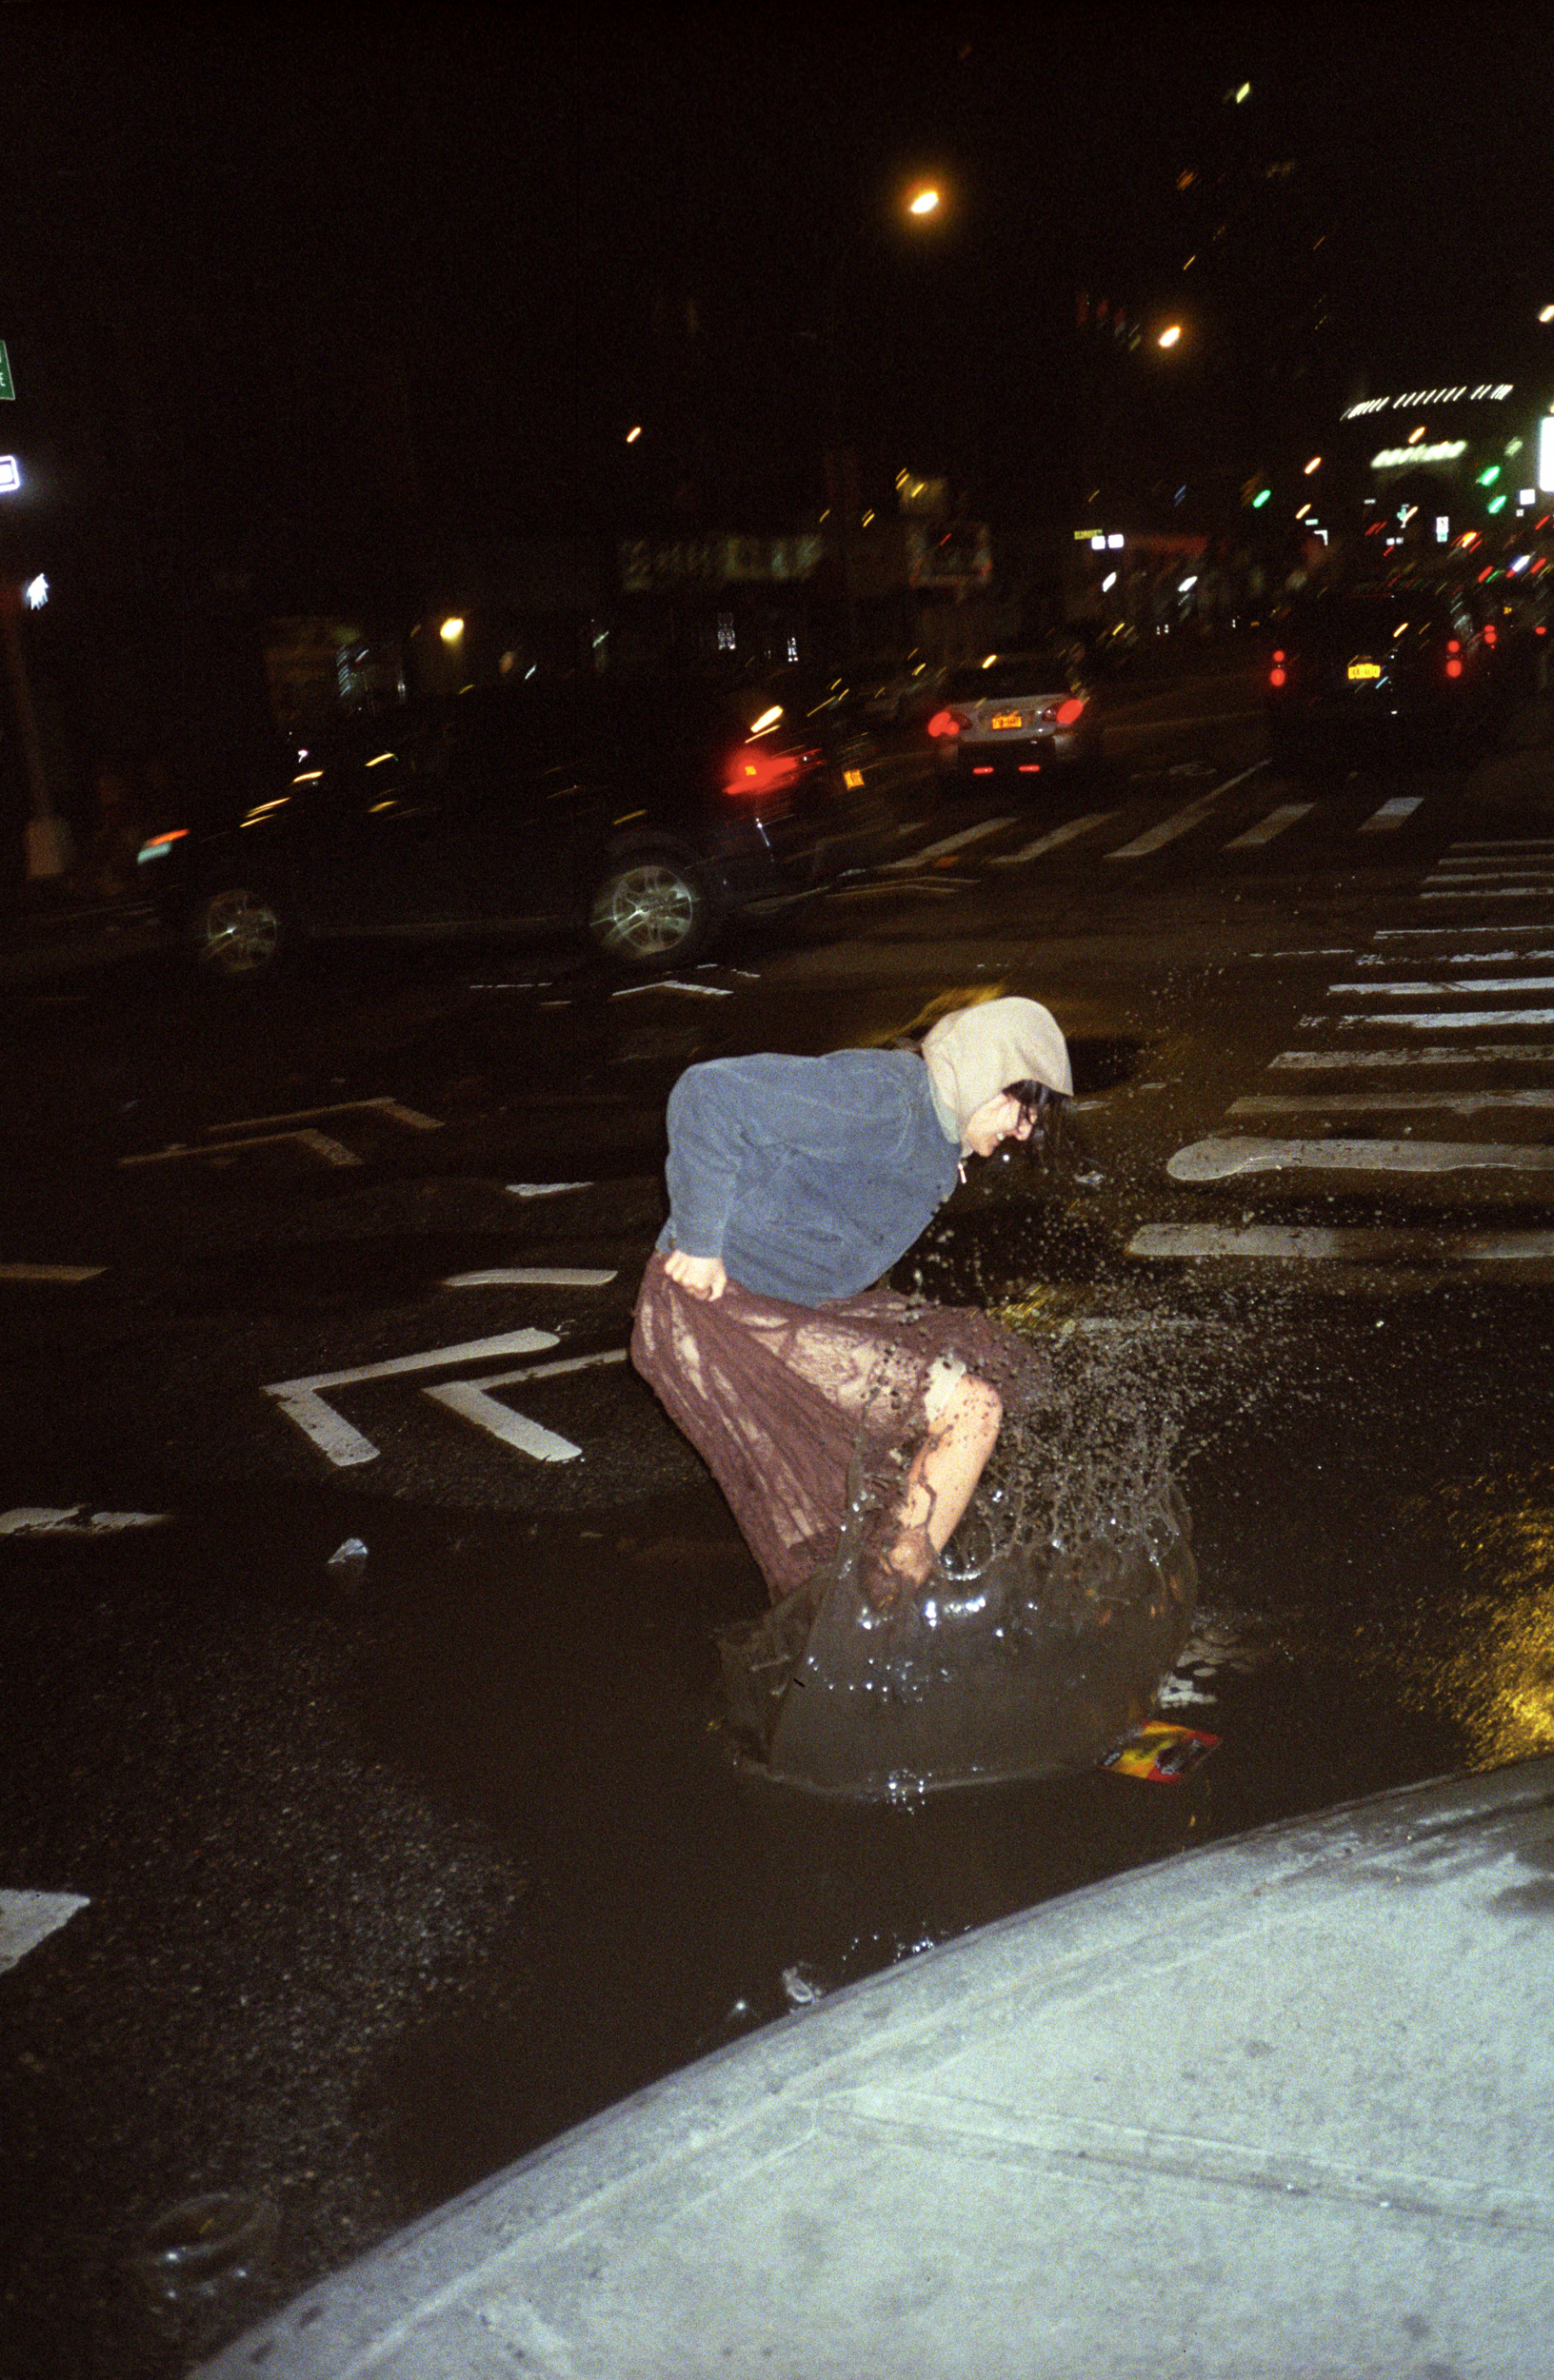 a person in a dress and hoodie splashes in a muddy NYC puddle